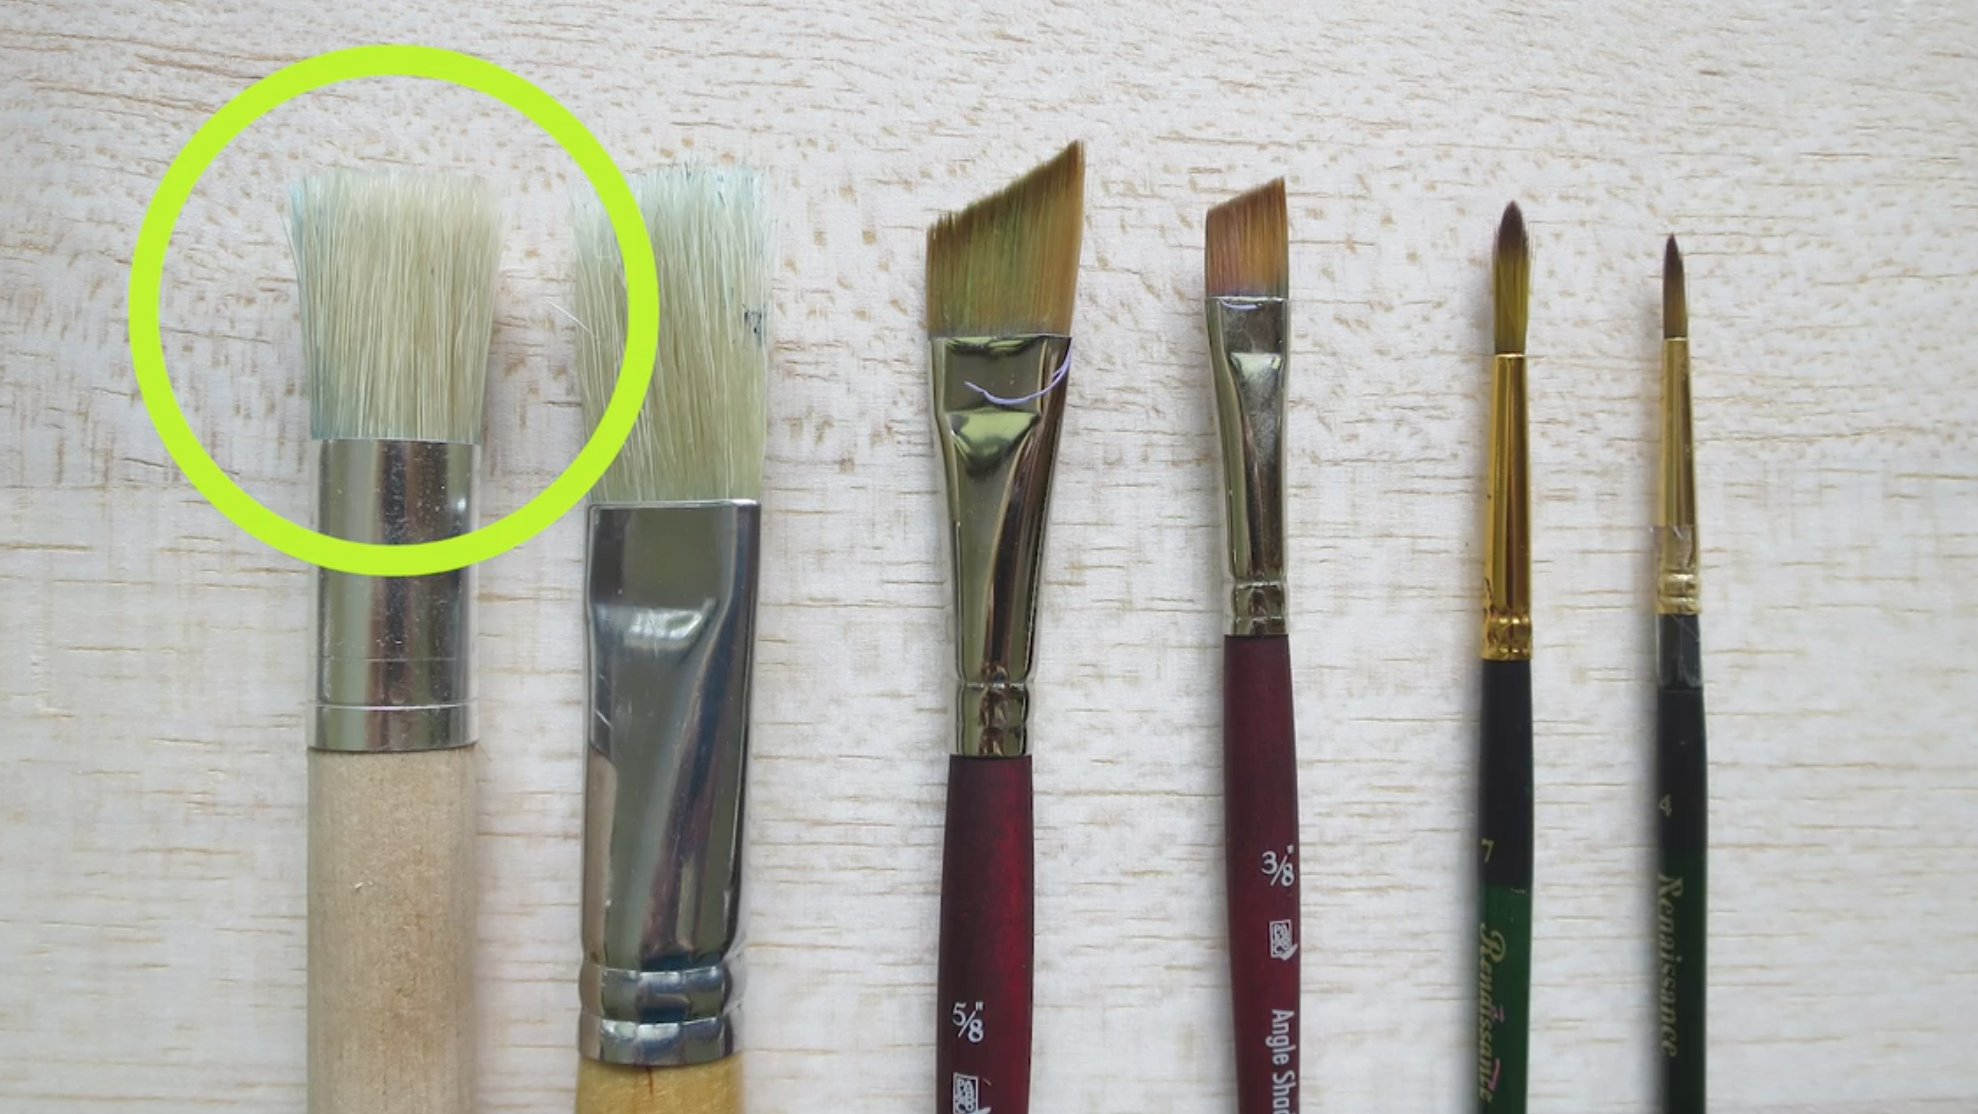 How to choose acrylic paint brushes - Acrylic painting techniques